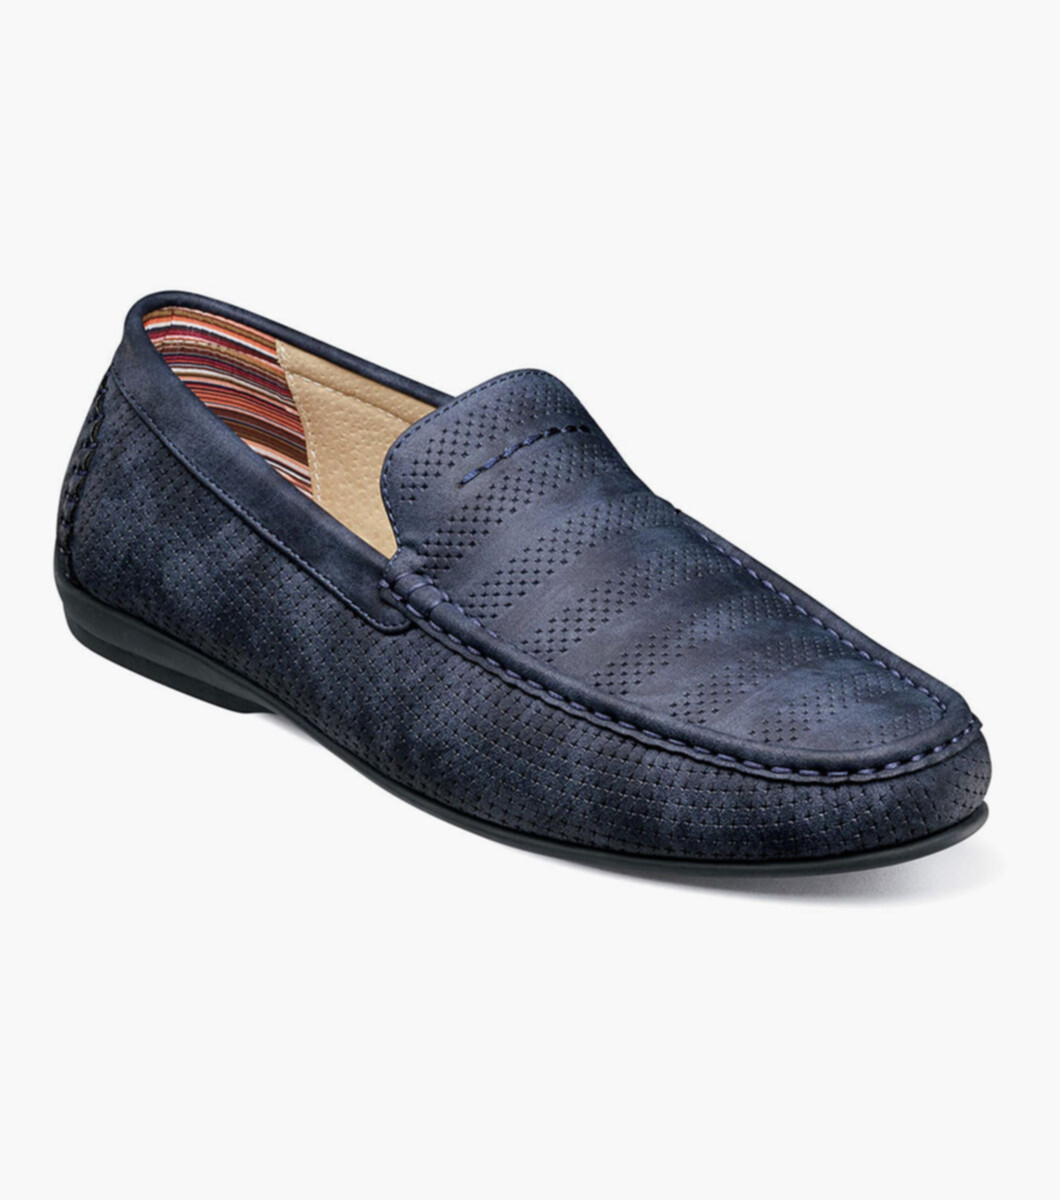 Stacy Adams Men's Cirrus Moc Toe Slip-on Loafer Driving Style 